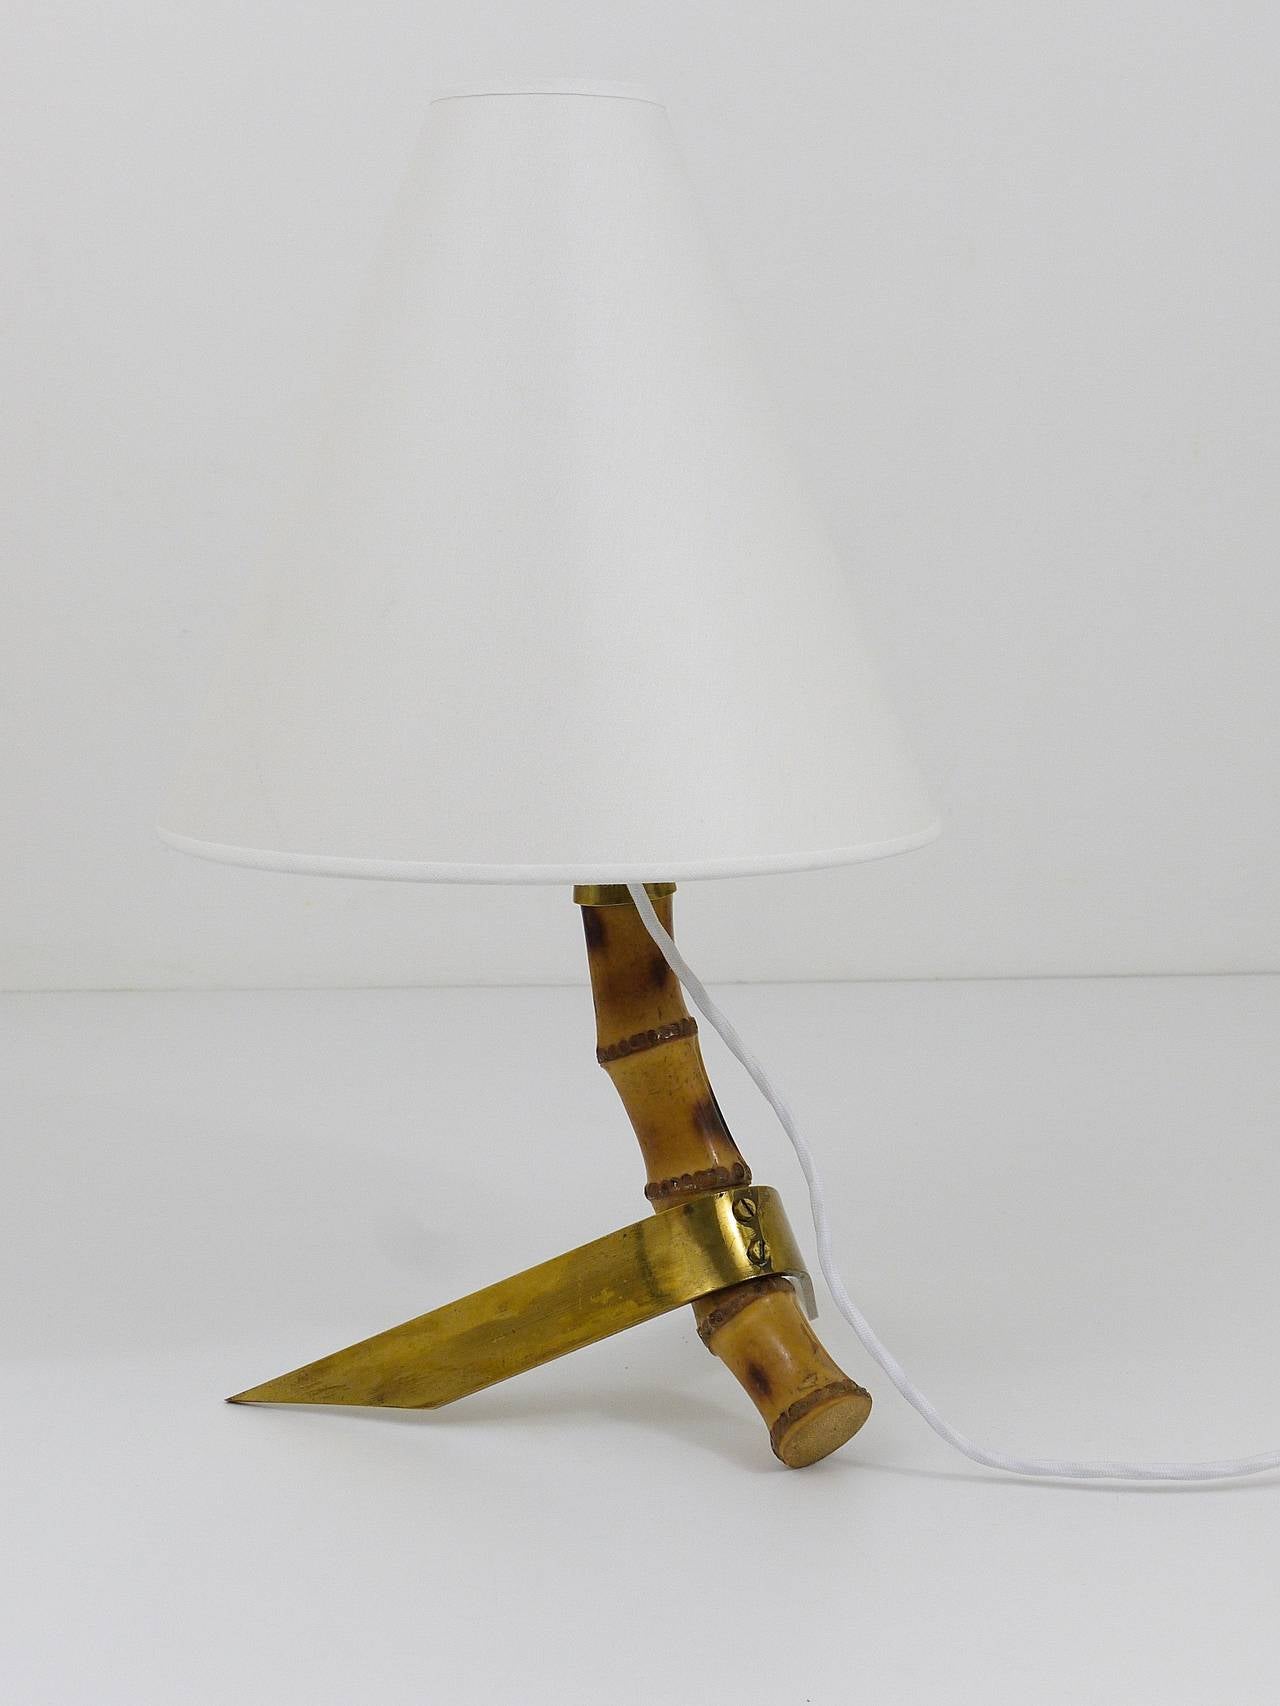 A very beautiful modernist table lamp from the 1950s, executed by Rupert Nikoll Austria. Has a beautiful bamboo neck and a two-leg brass base and its original, refurbished lampshade. In good condition with nice patina on the brass.